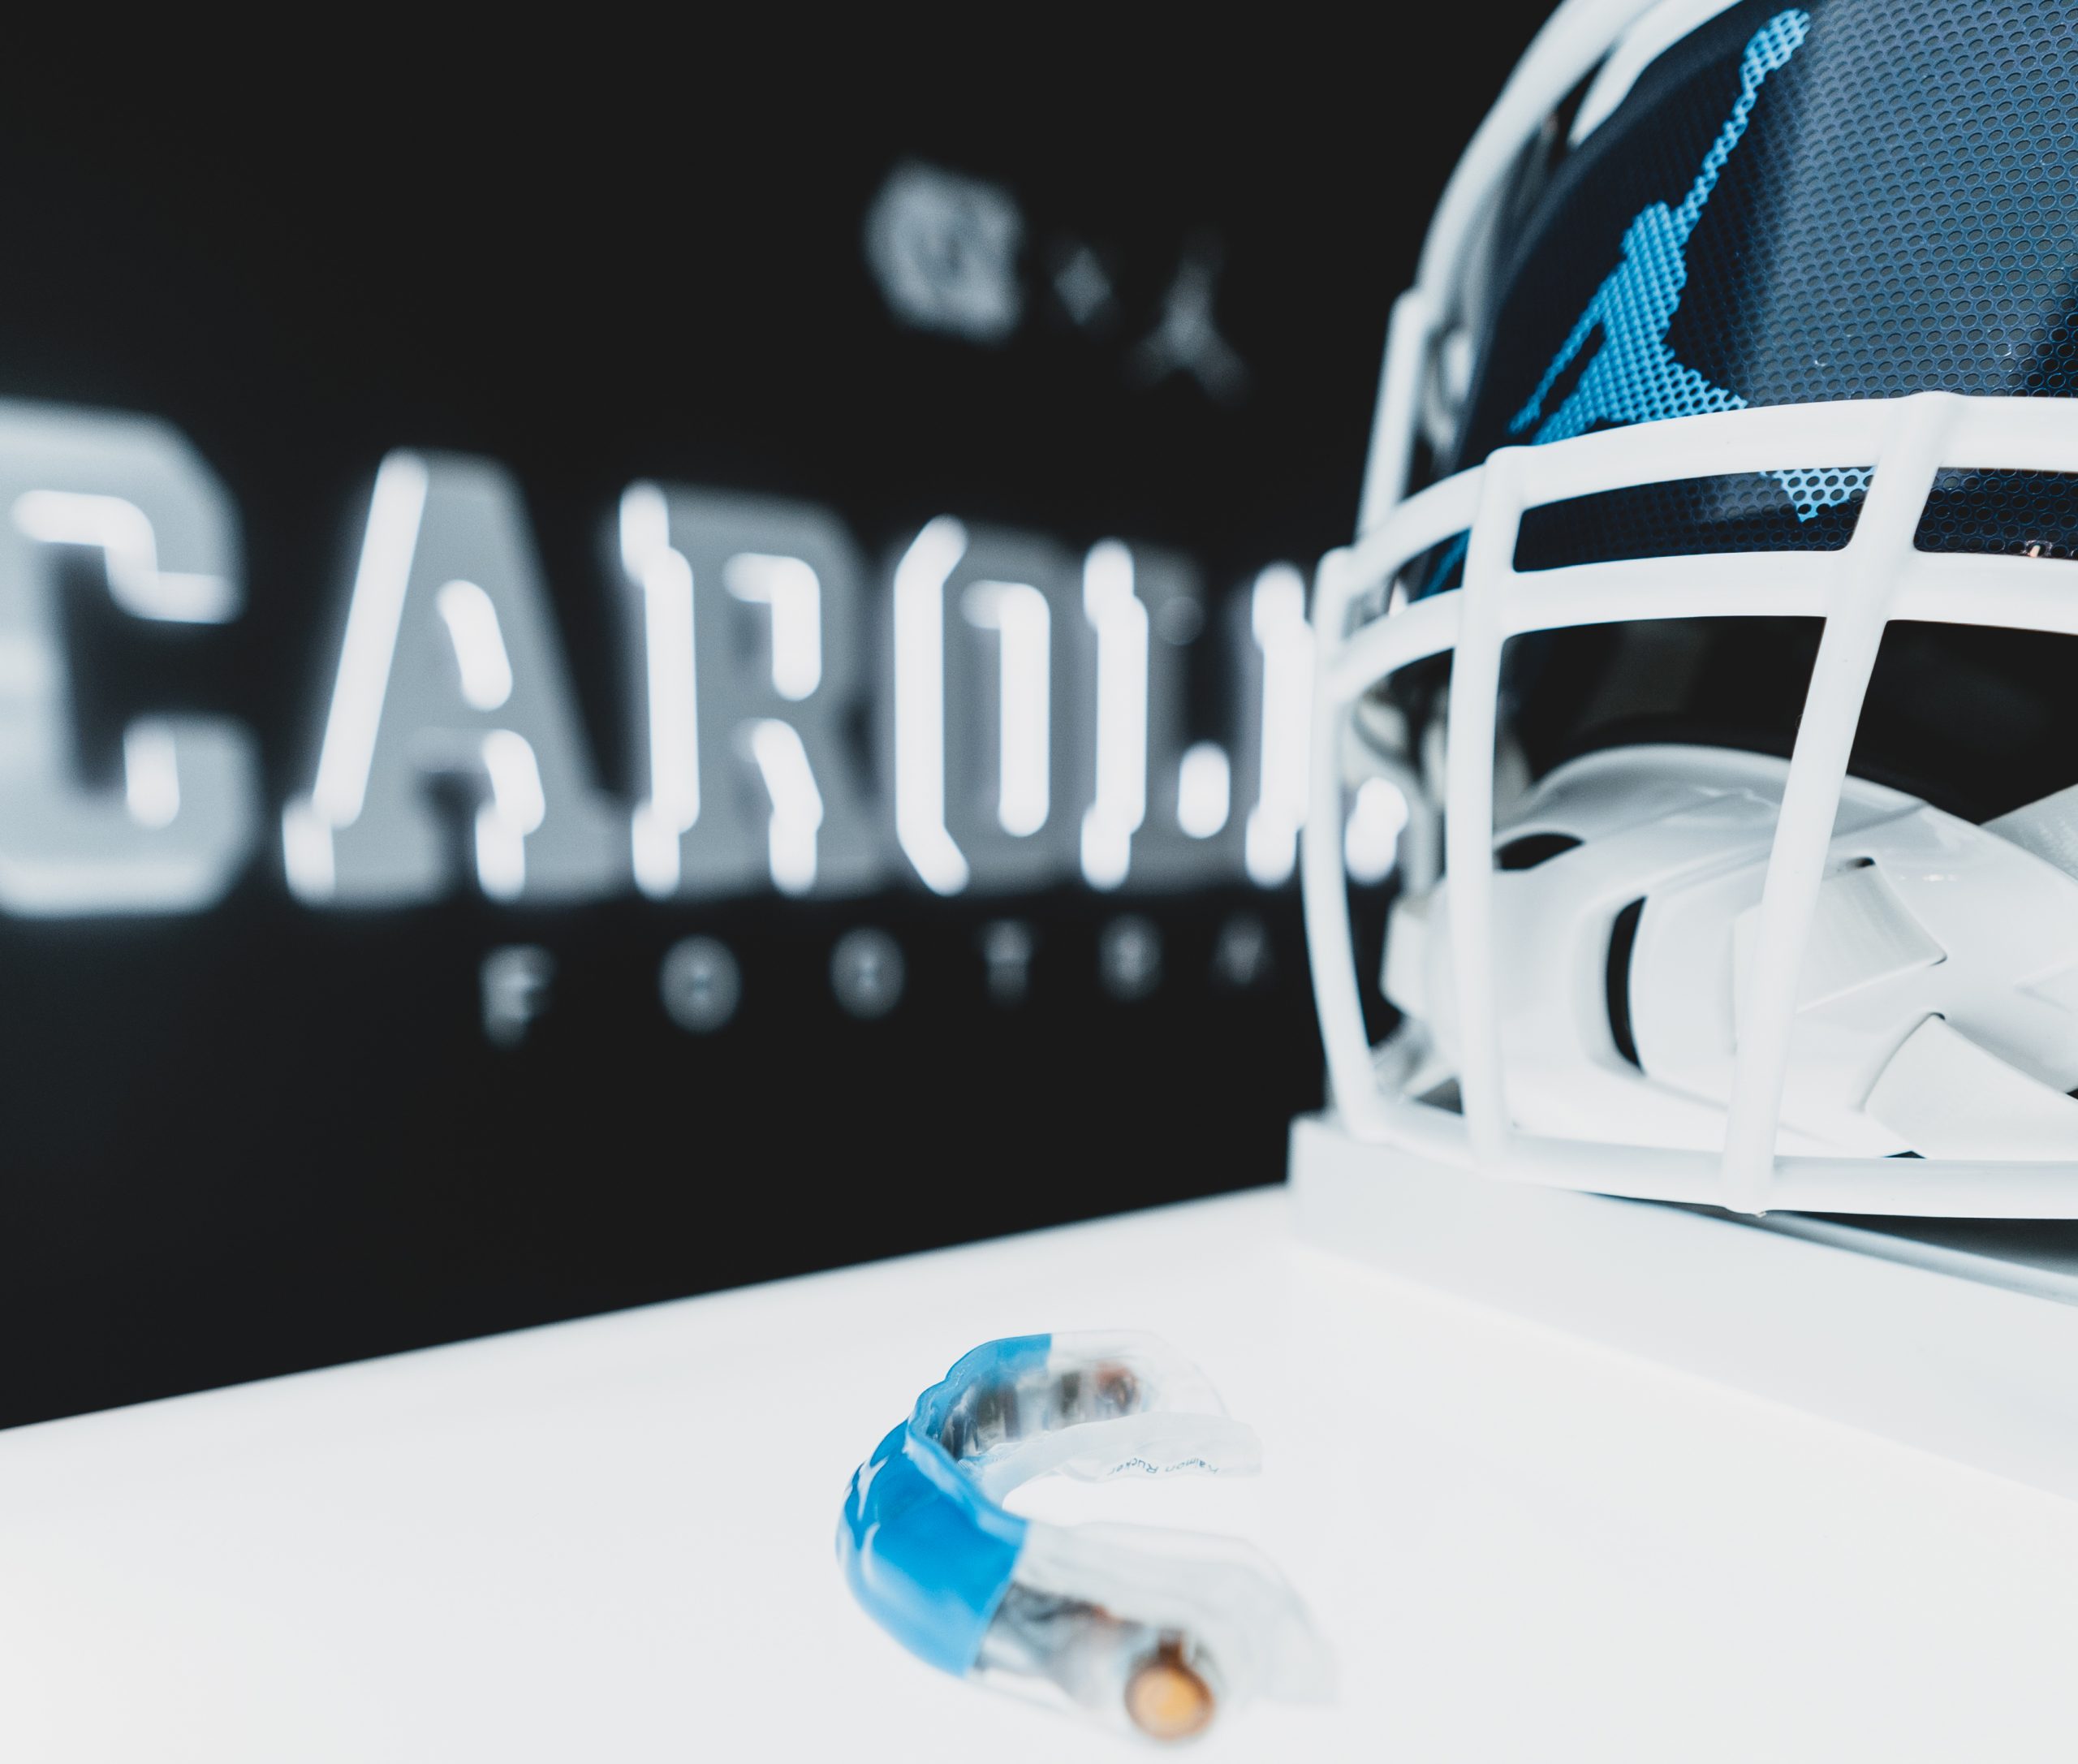 photo Carolina football helmet with mouthguard in front on a table